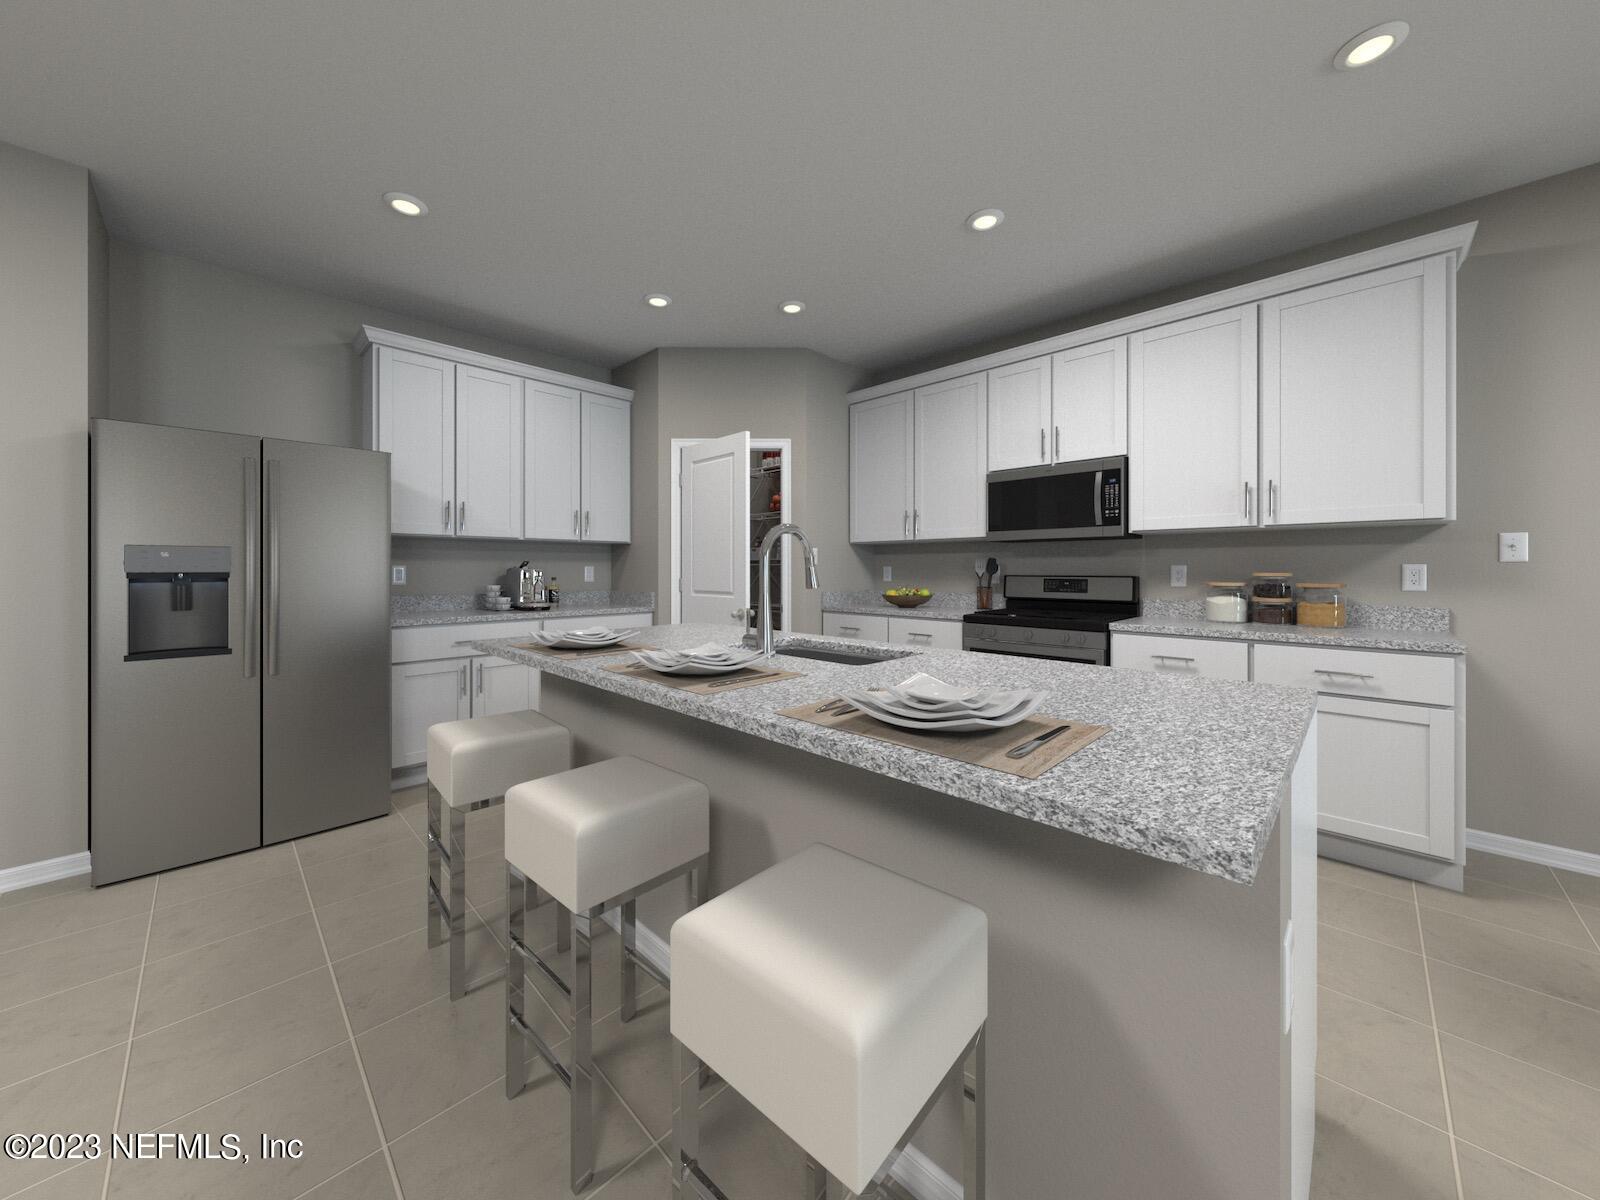 a kitchen with kitchen island granite countertop a sink a counter top space stainless steel appliances and cabinets